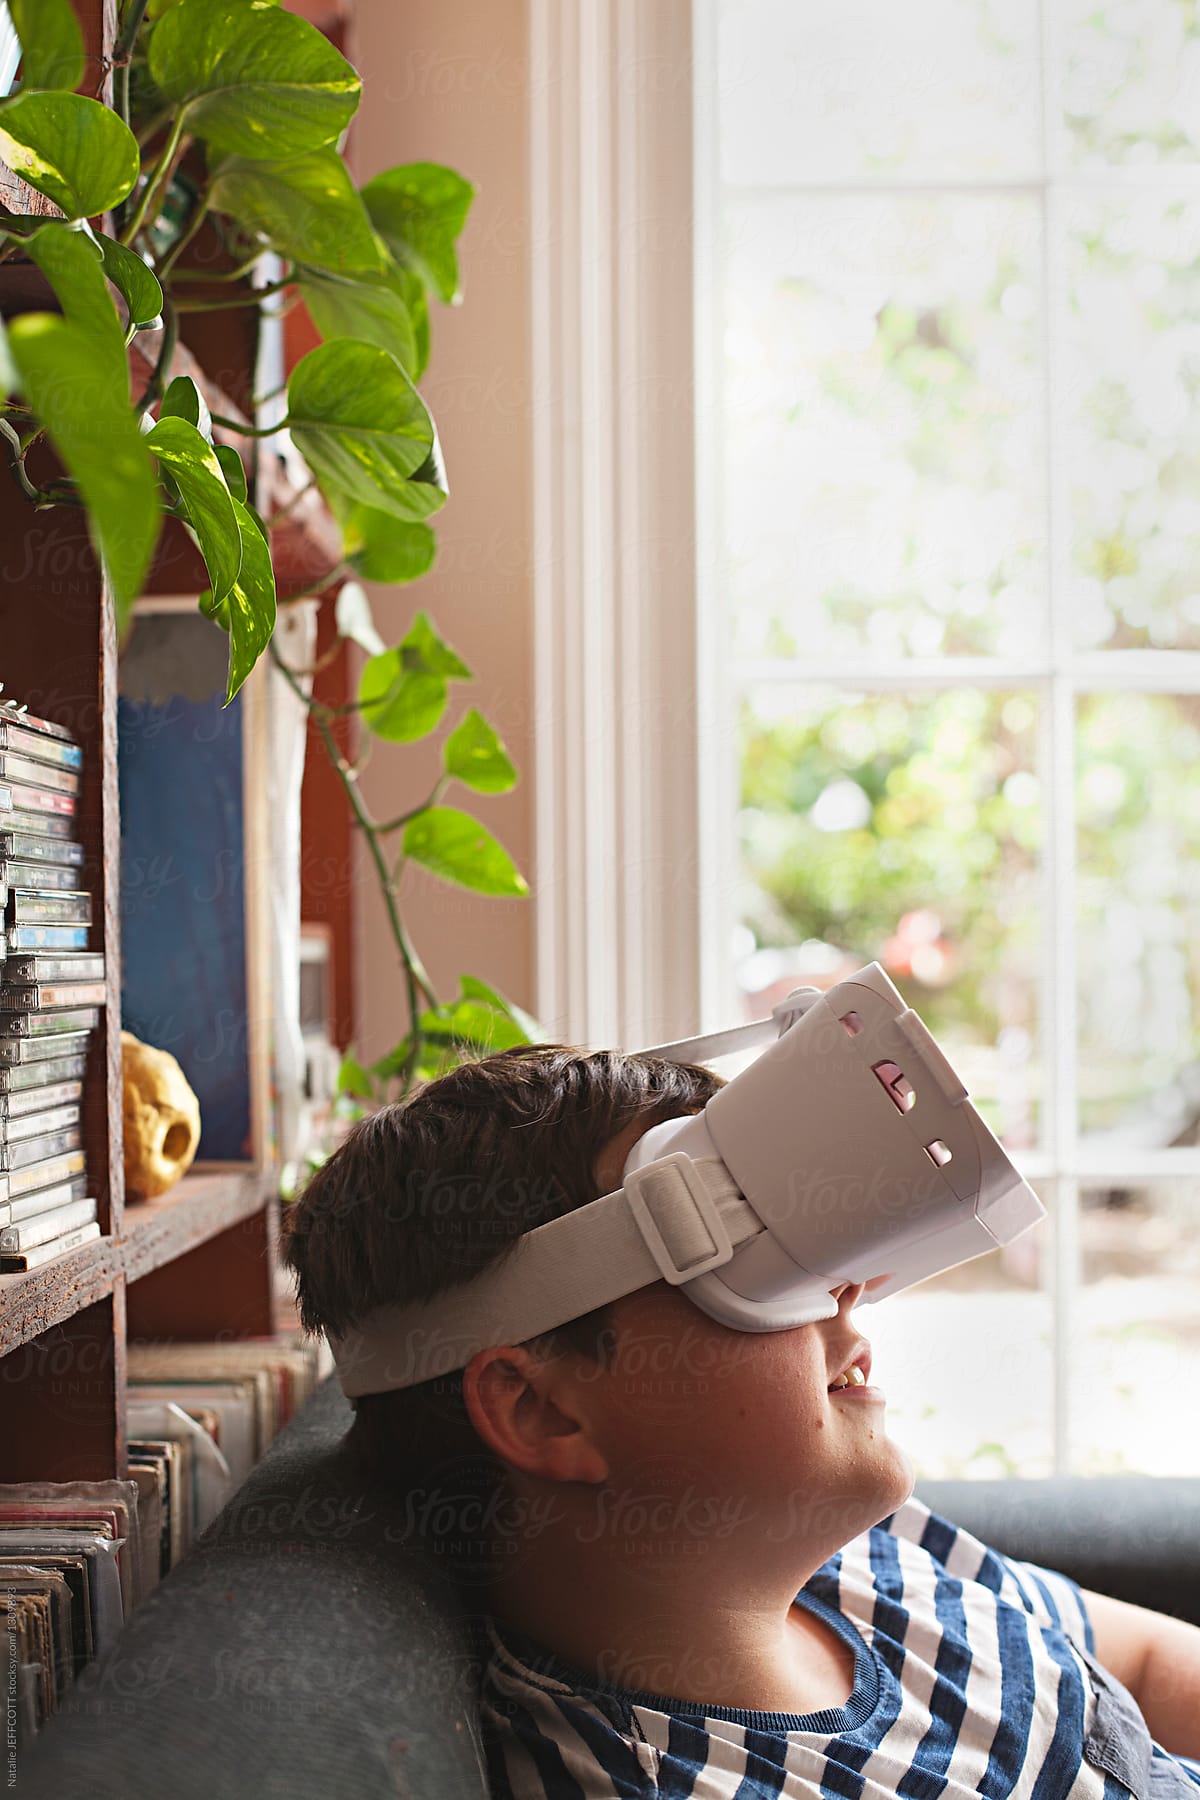 A young boy using virtual reality googles / headset at home